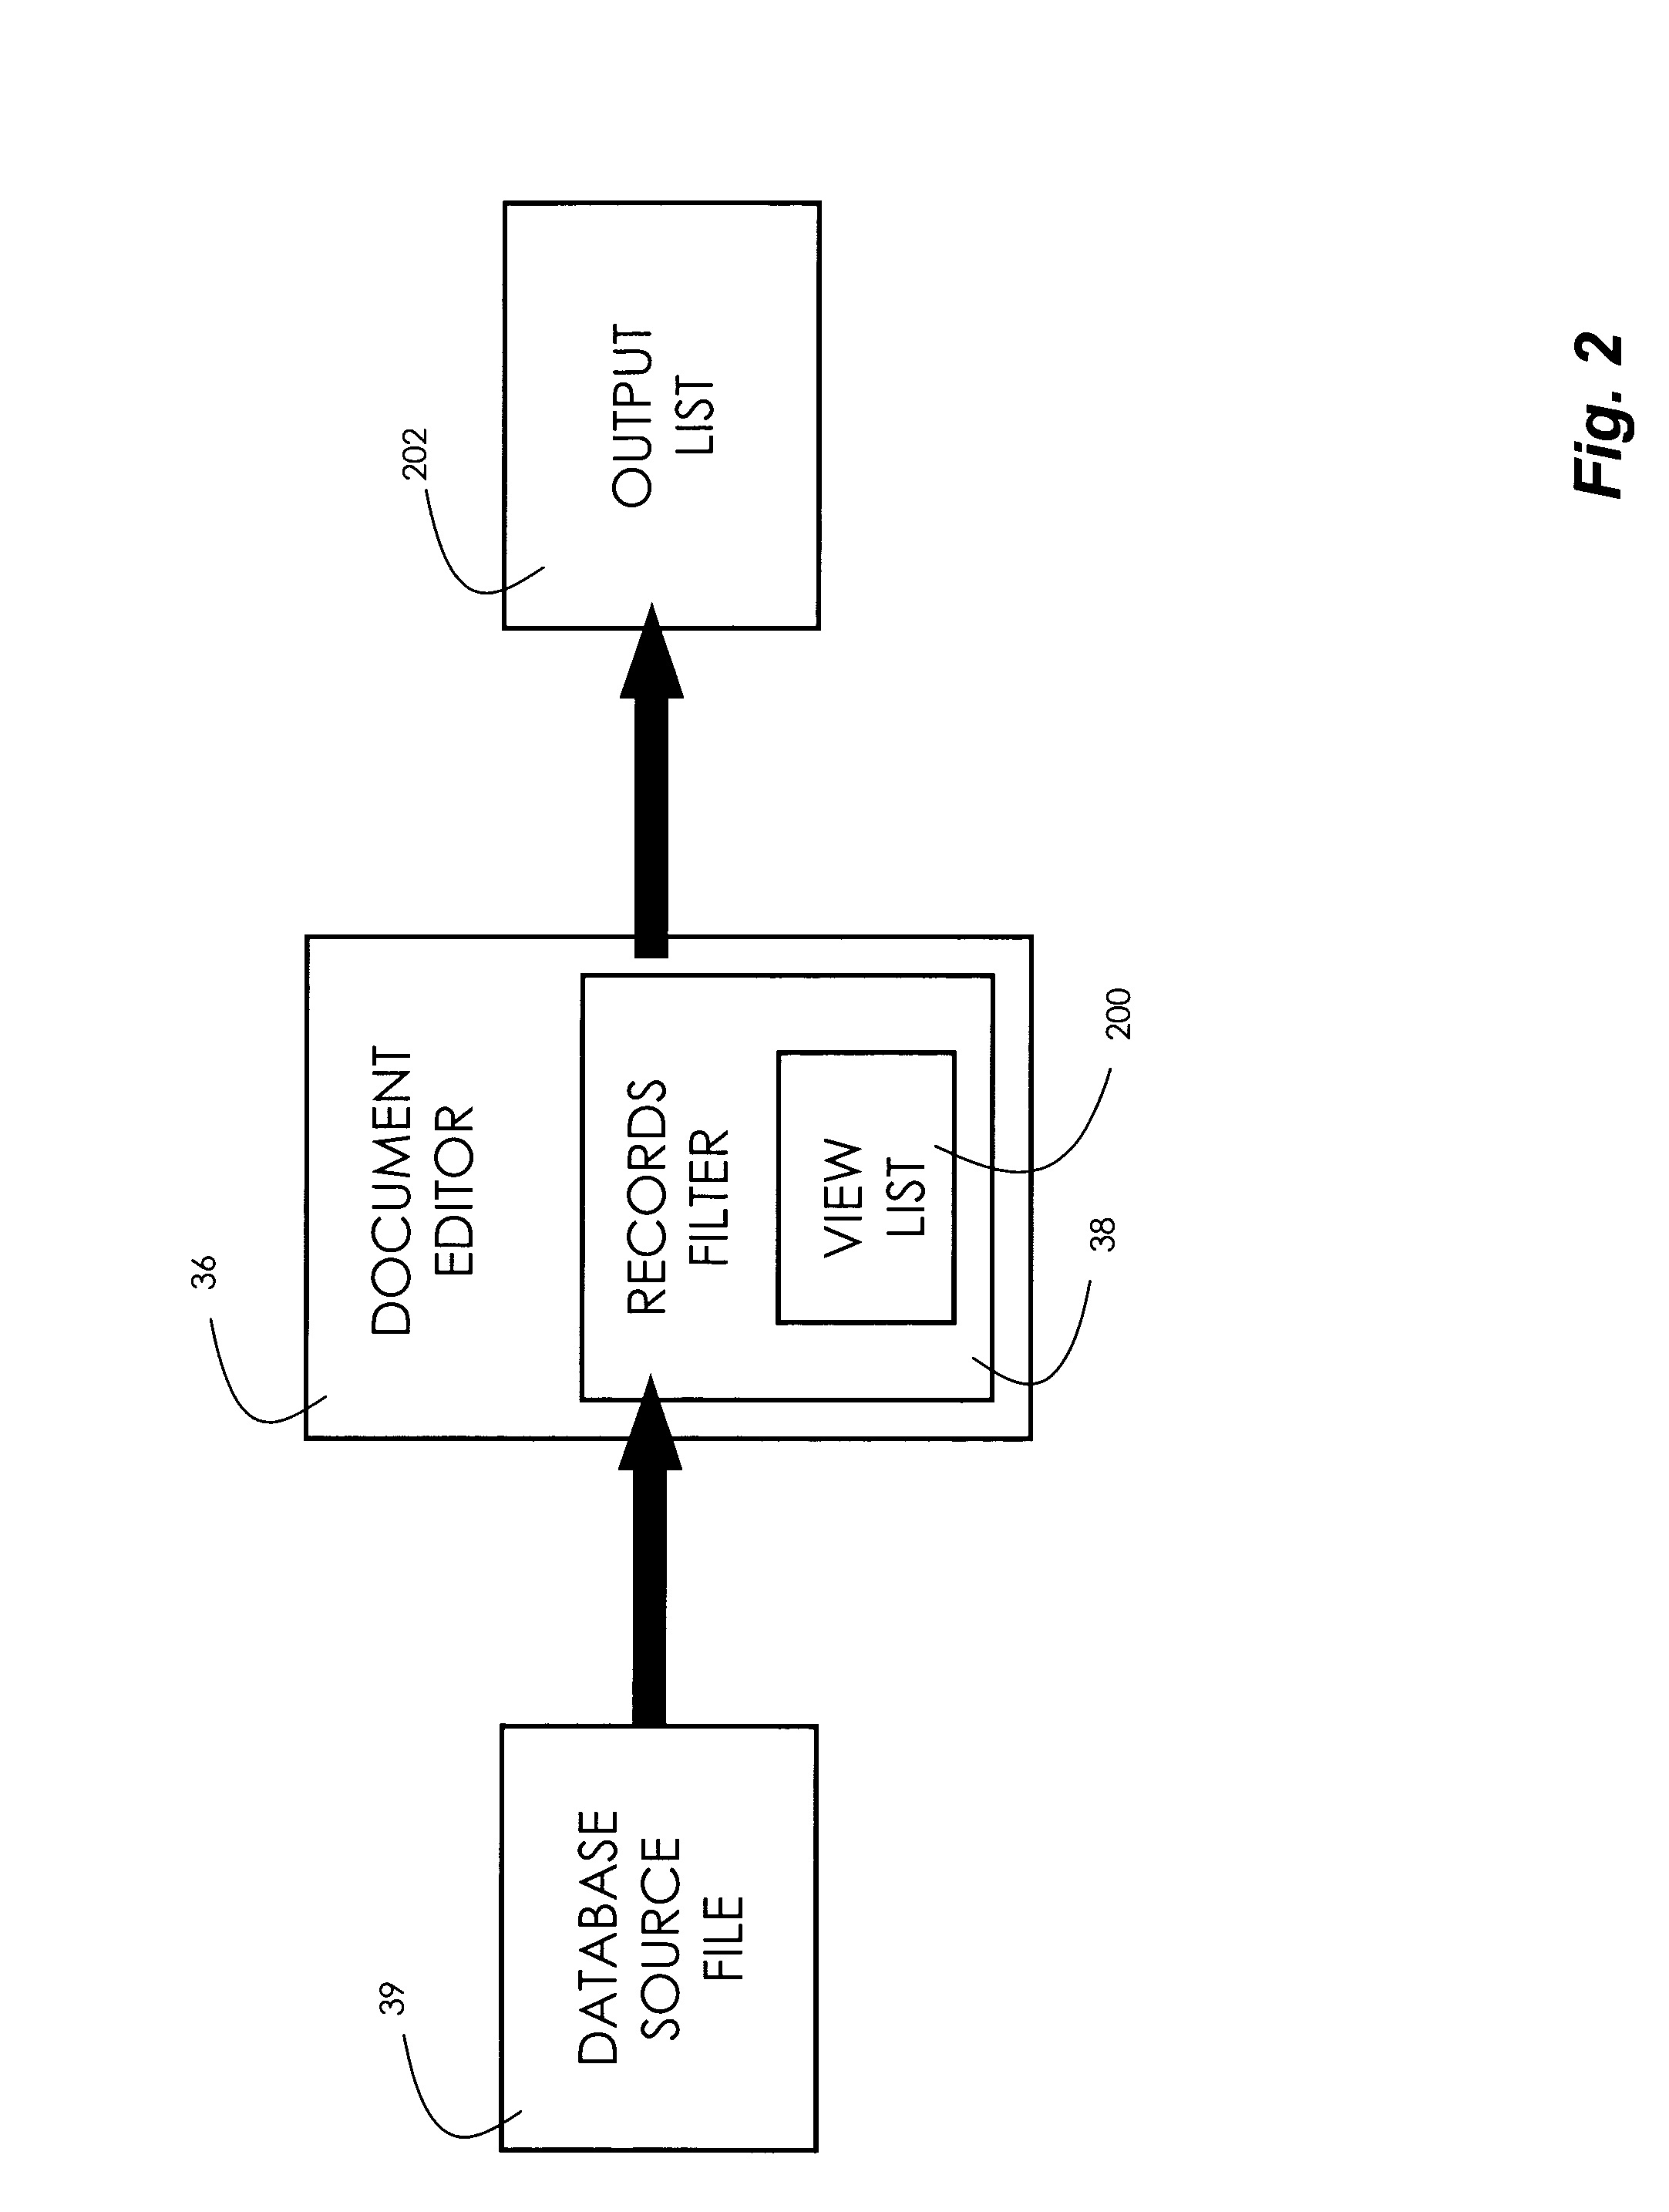 System and method for filtering database records